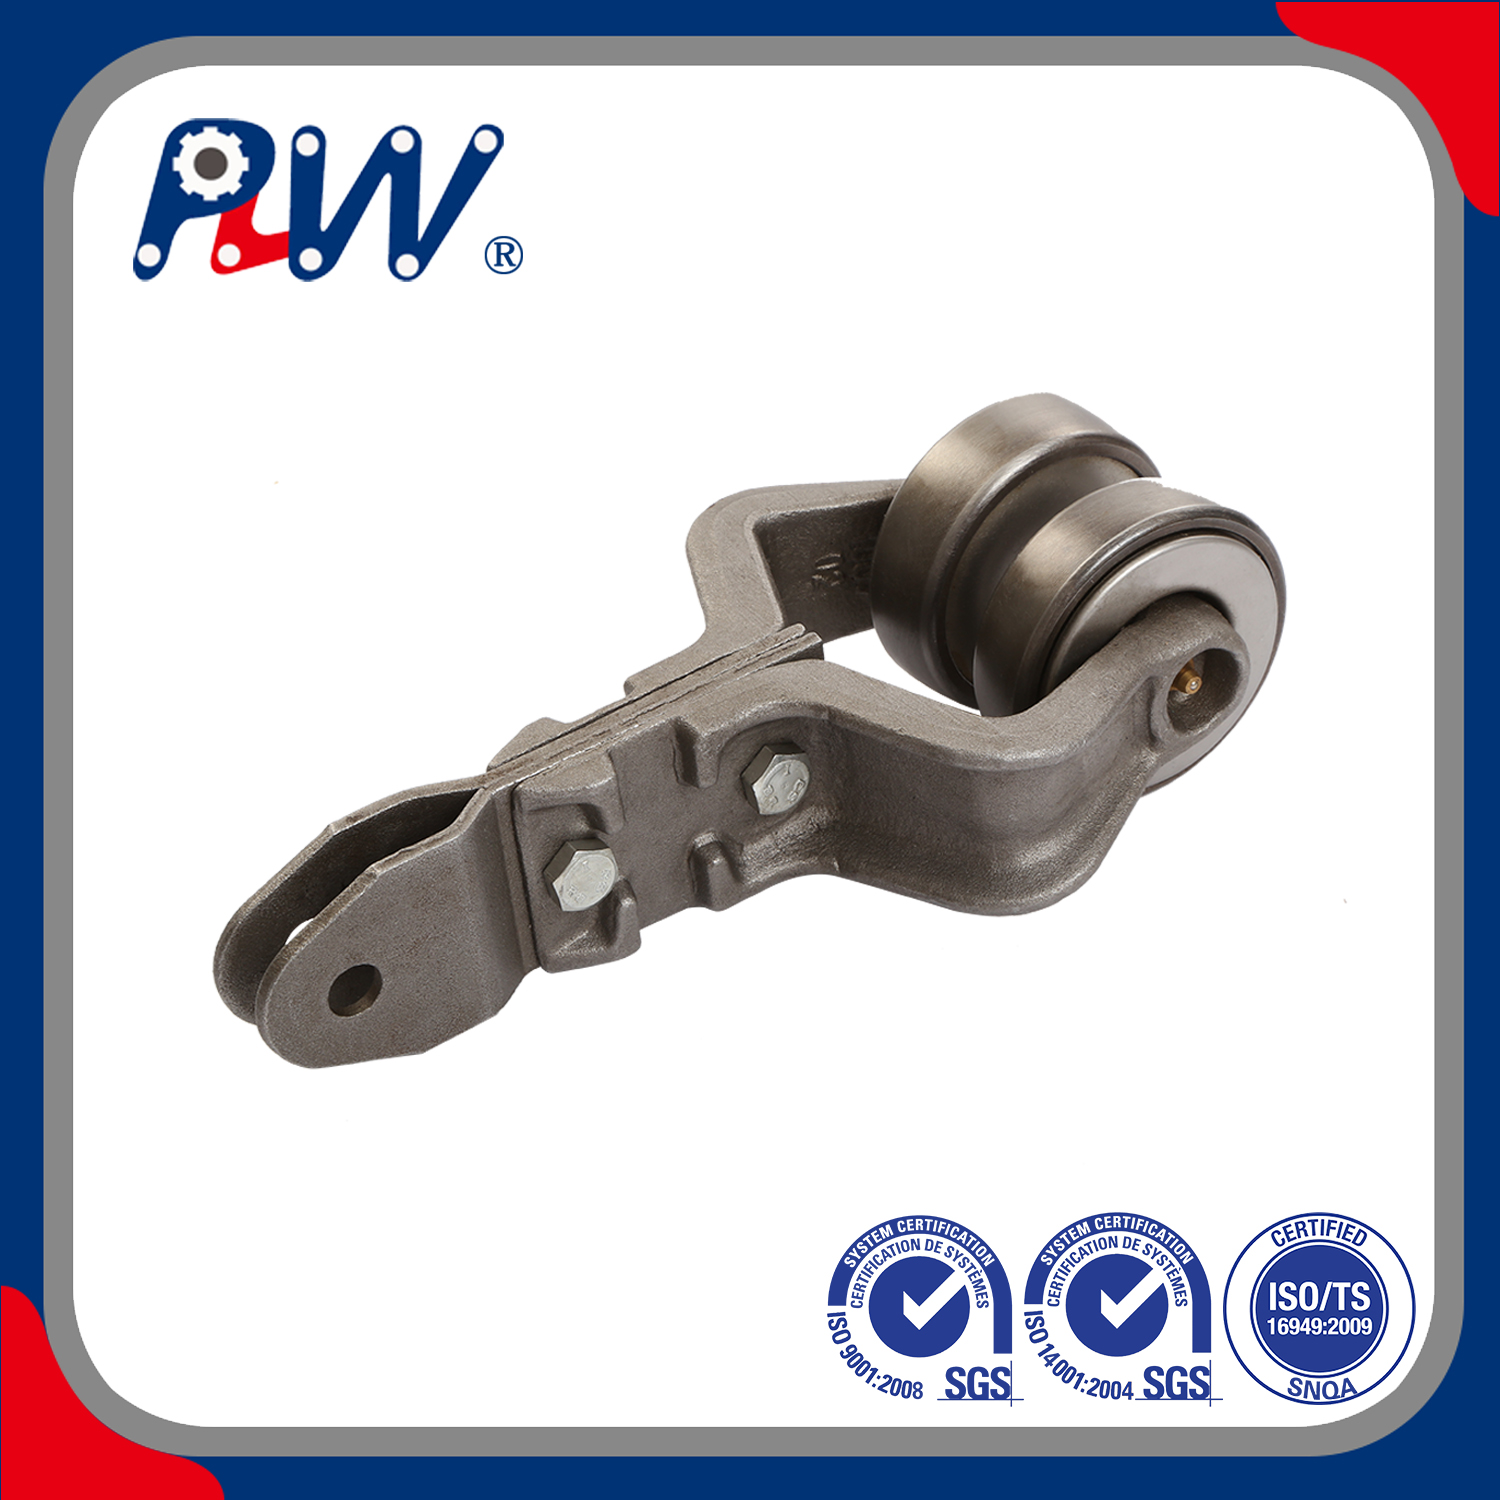 Drop Forged Link Rivetless Chains for Conveyor Machine on X348, X458, X678, X689